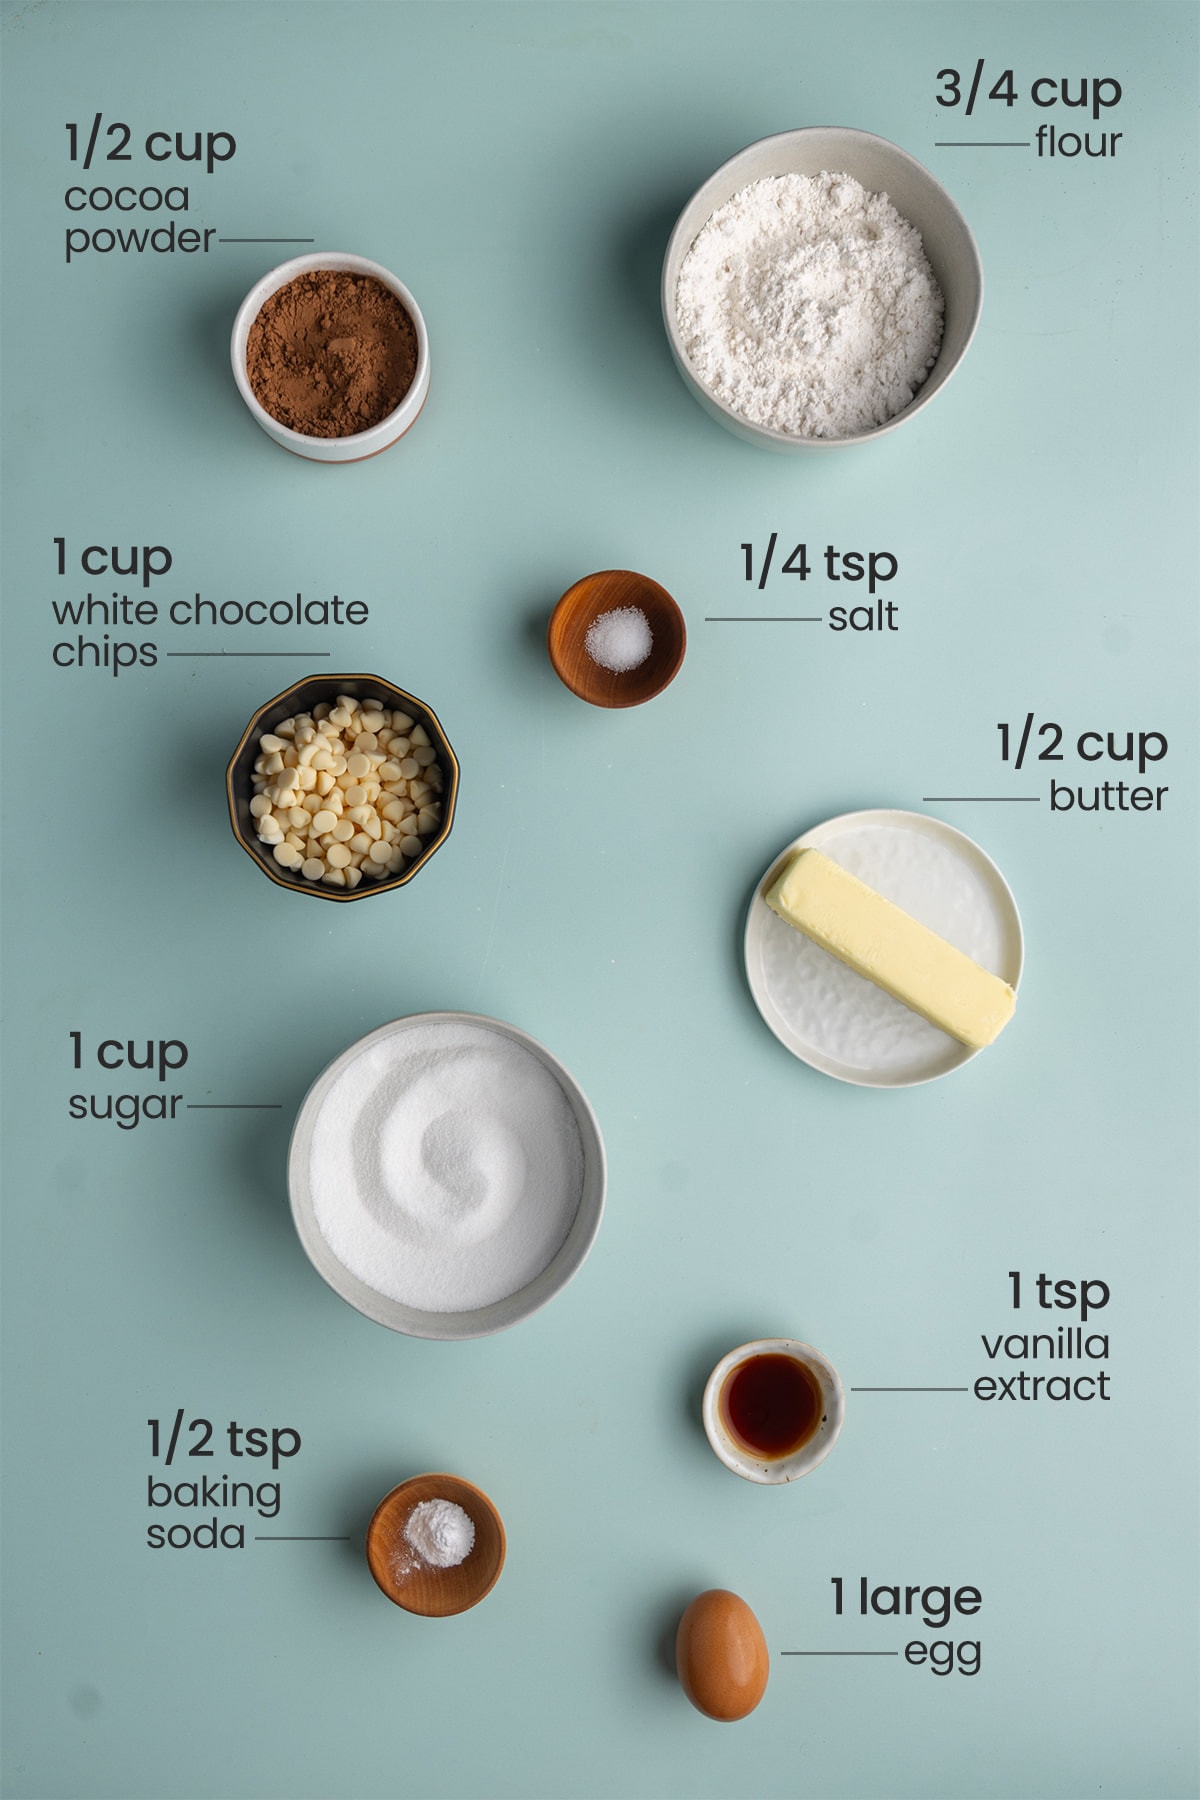 All ingredients needed for Chocolate Cookies with White Chocolate Chips including cocoa powder, flour, salt, white chocolate chips, unsalted butter, granulated sugar, vanilla extract, baking soda, and an egg